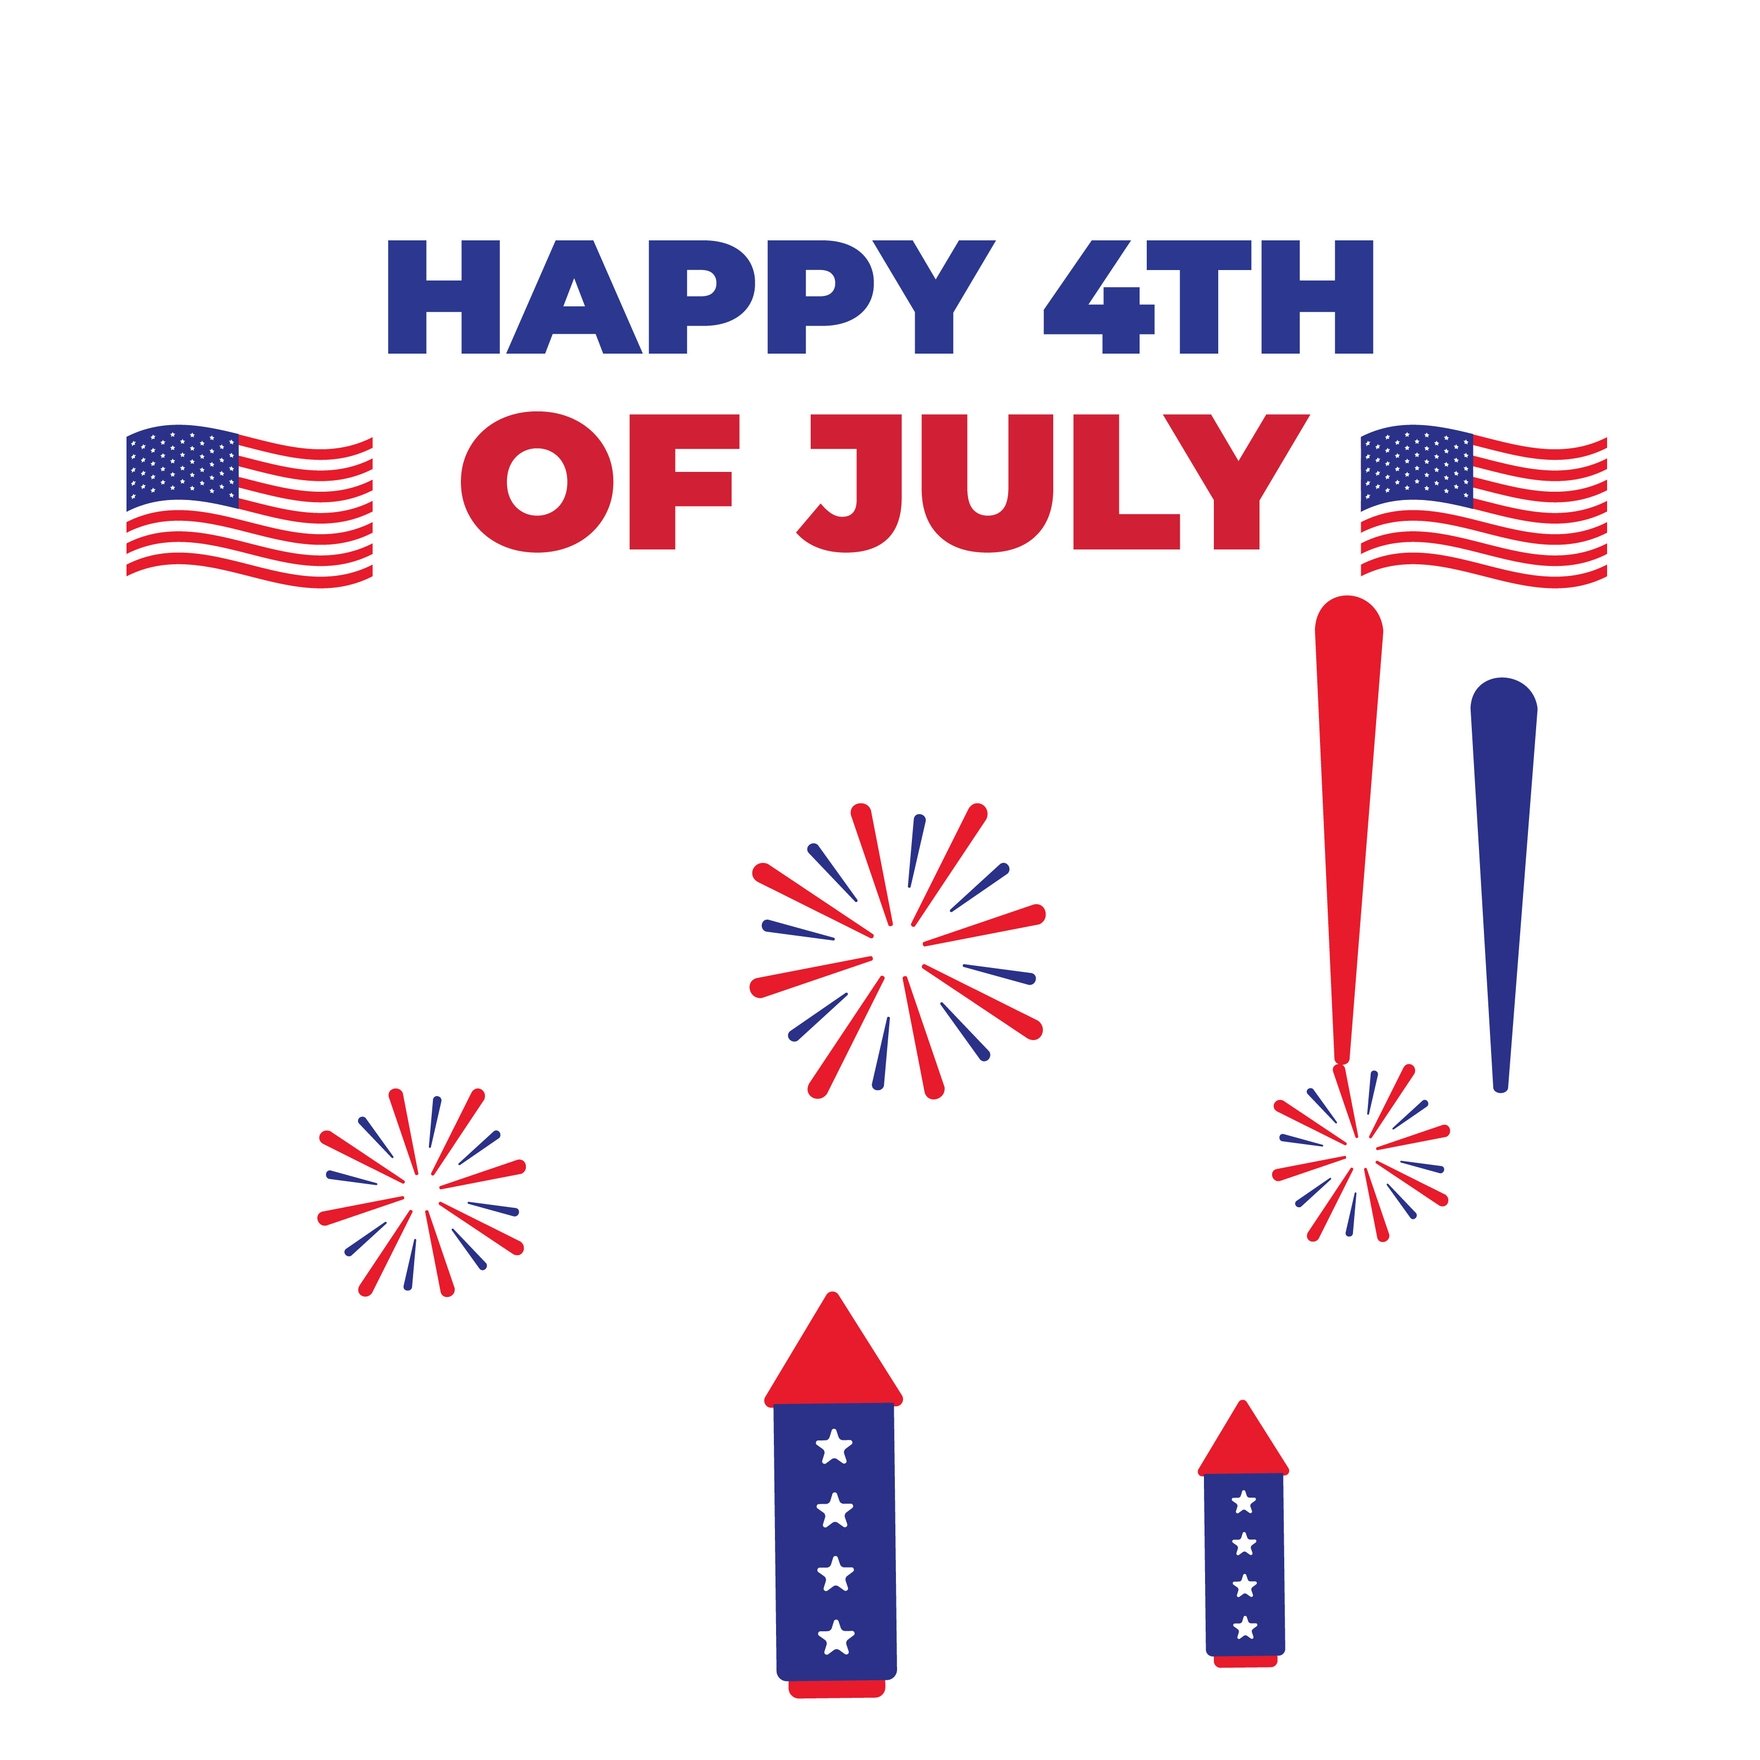 Free 4th Of July Firework Gif in Illustrator, EPS, SVG, JPG, GIF, PNG, After Effects